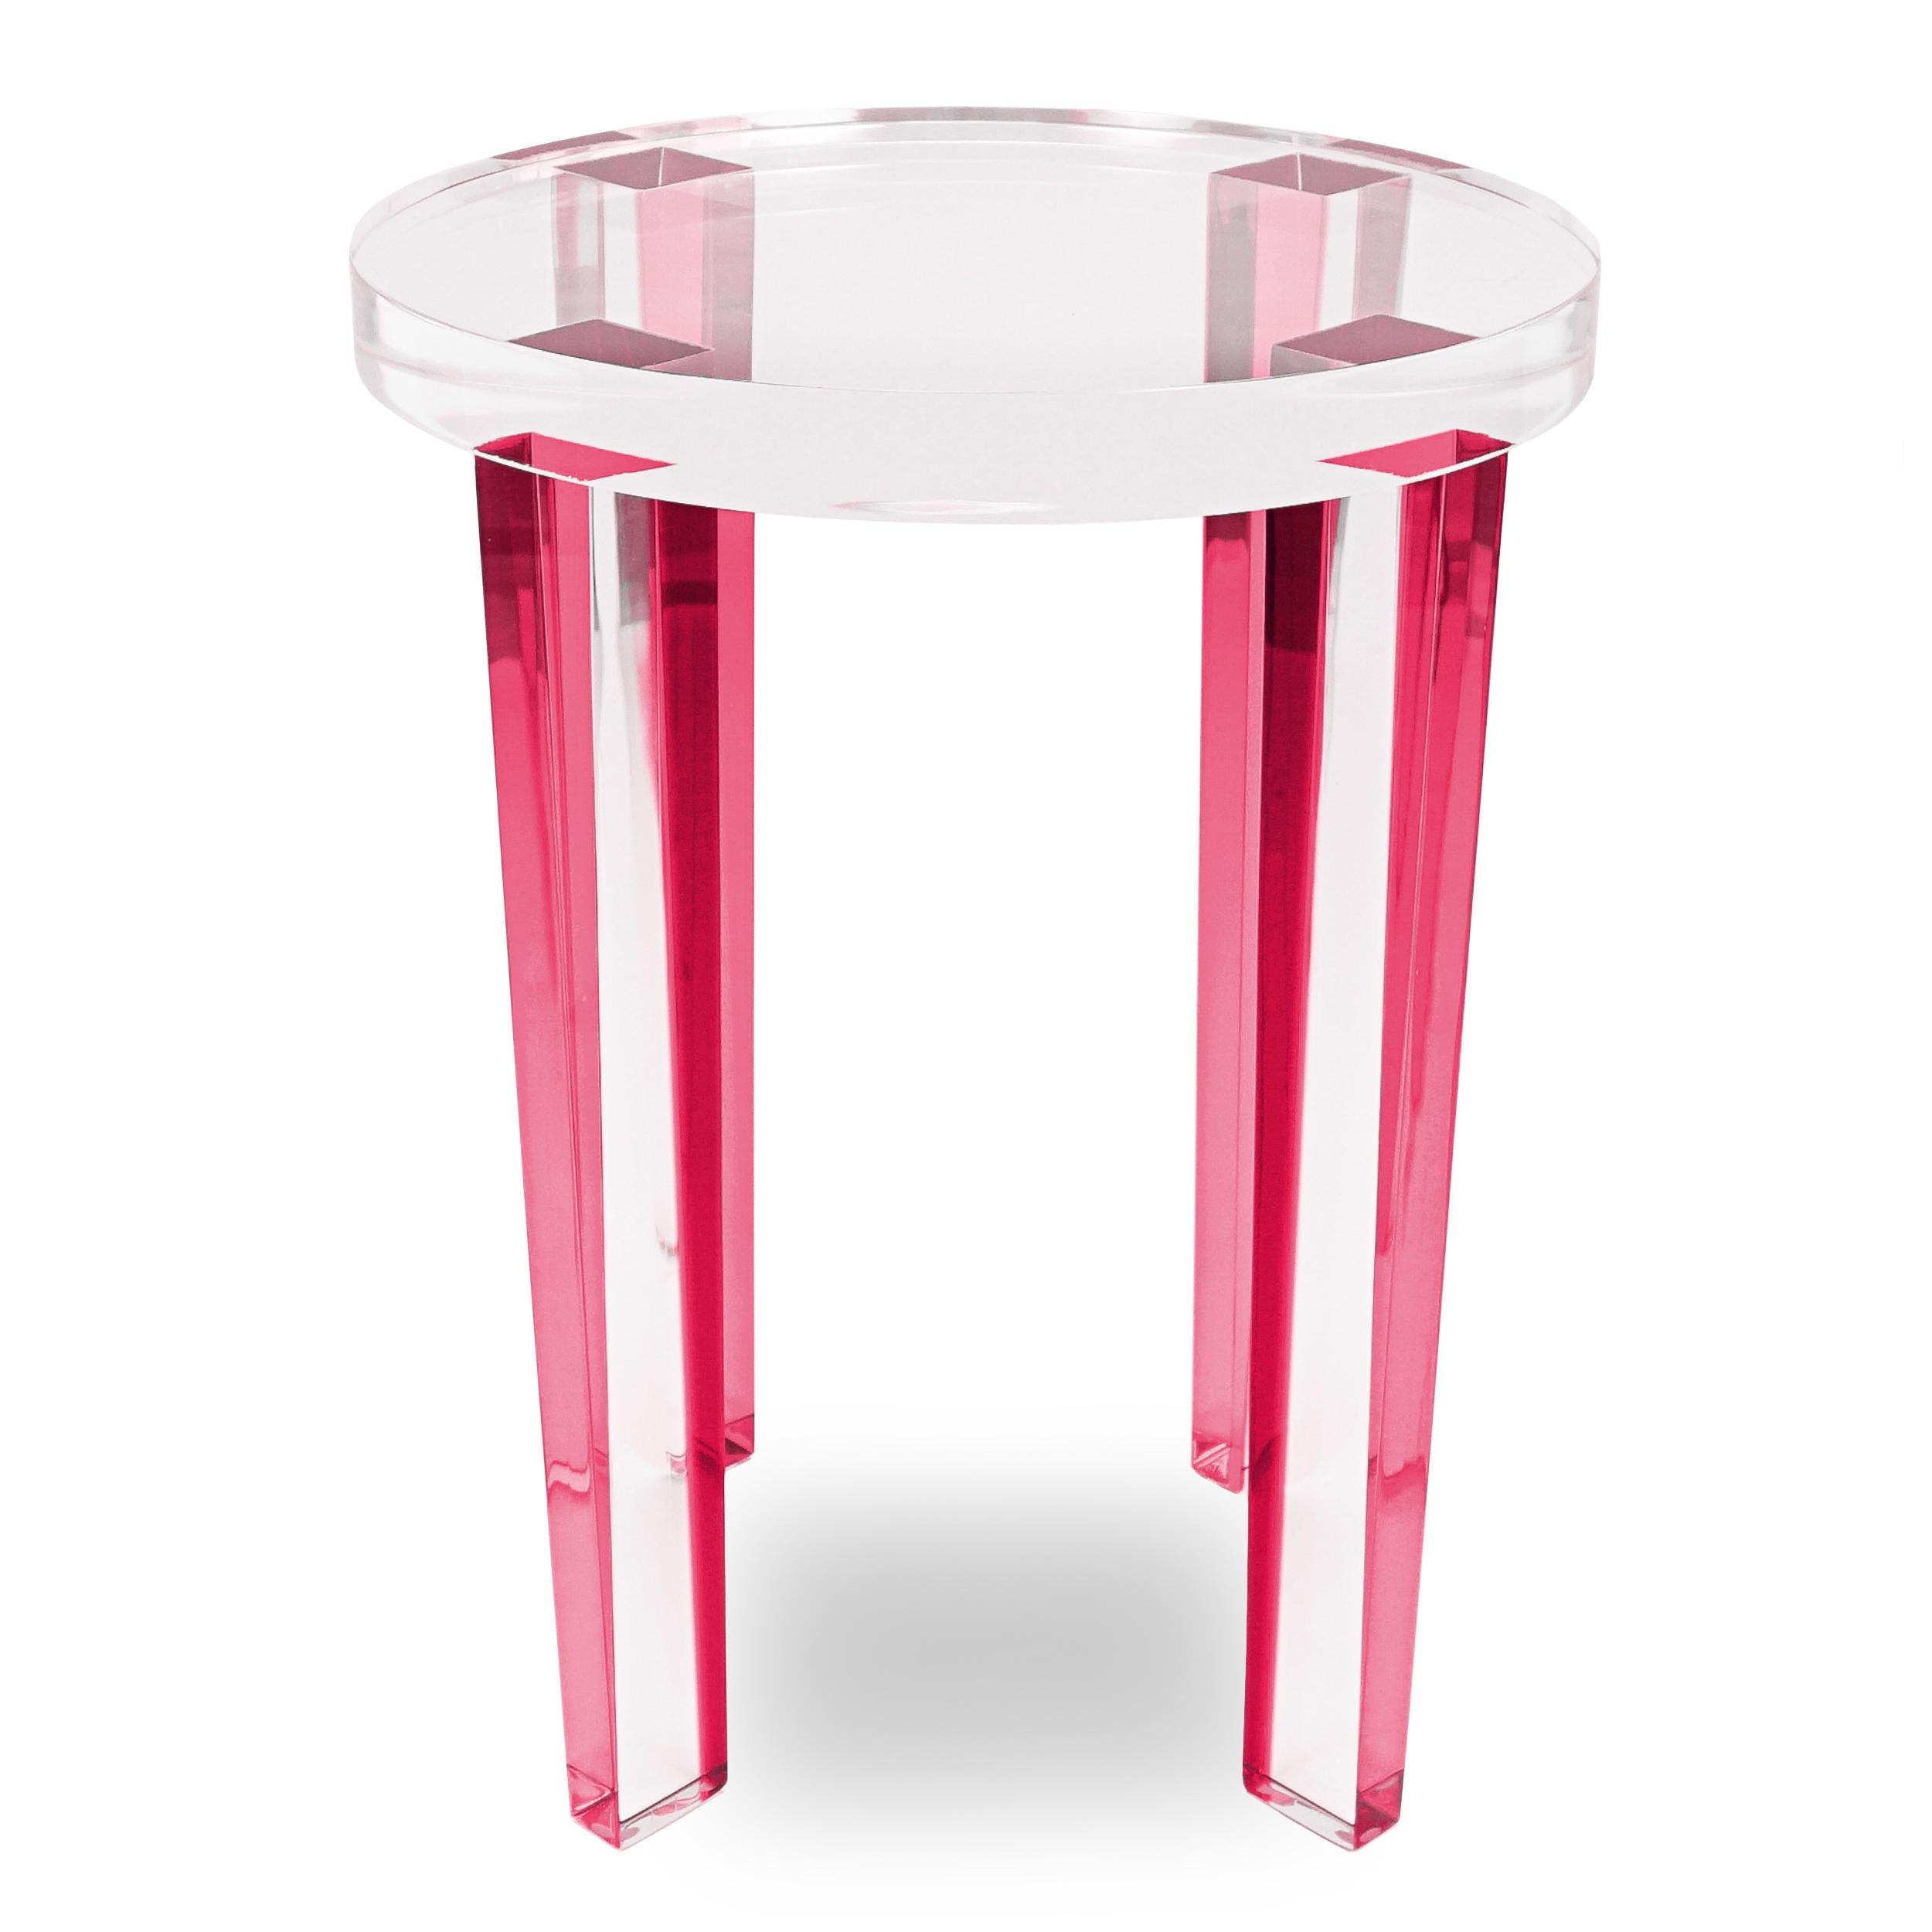 This round lucite side table has been built with pink colored Lucite legs and a clear Lucite top. This little side table will reflect light and create a big impact.

Overall: 15”Dia. x 19”H

Price As Shown: $1,850 each

2023 - Available Right Now